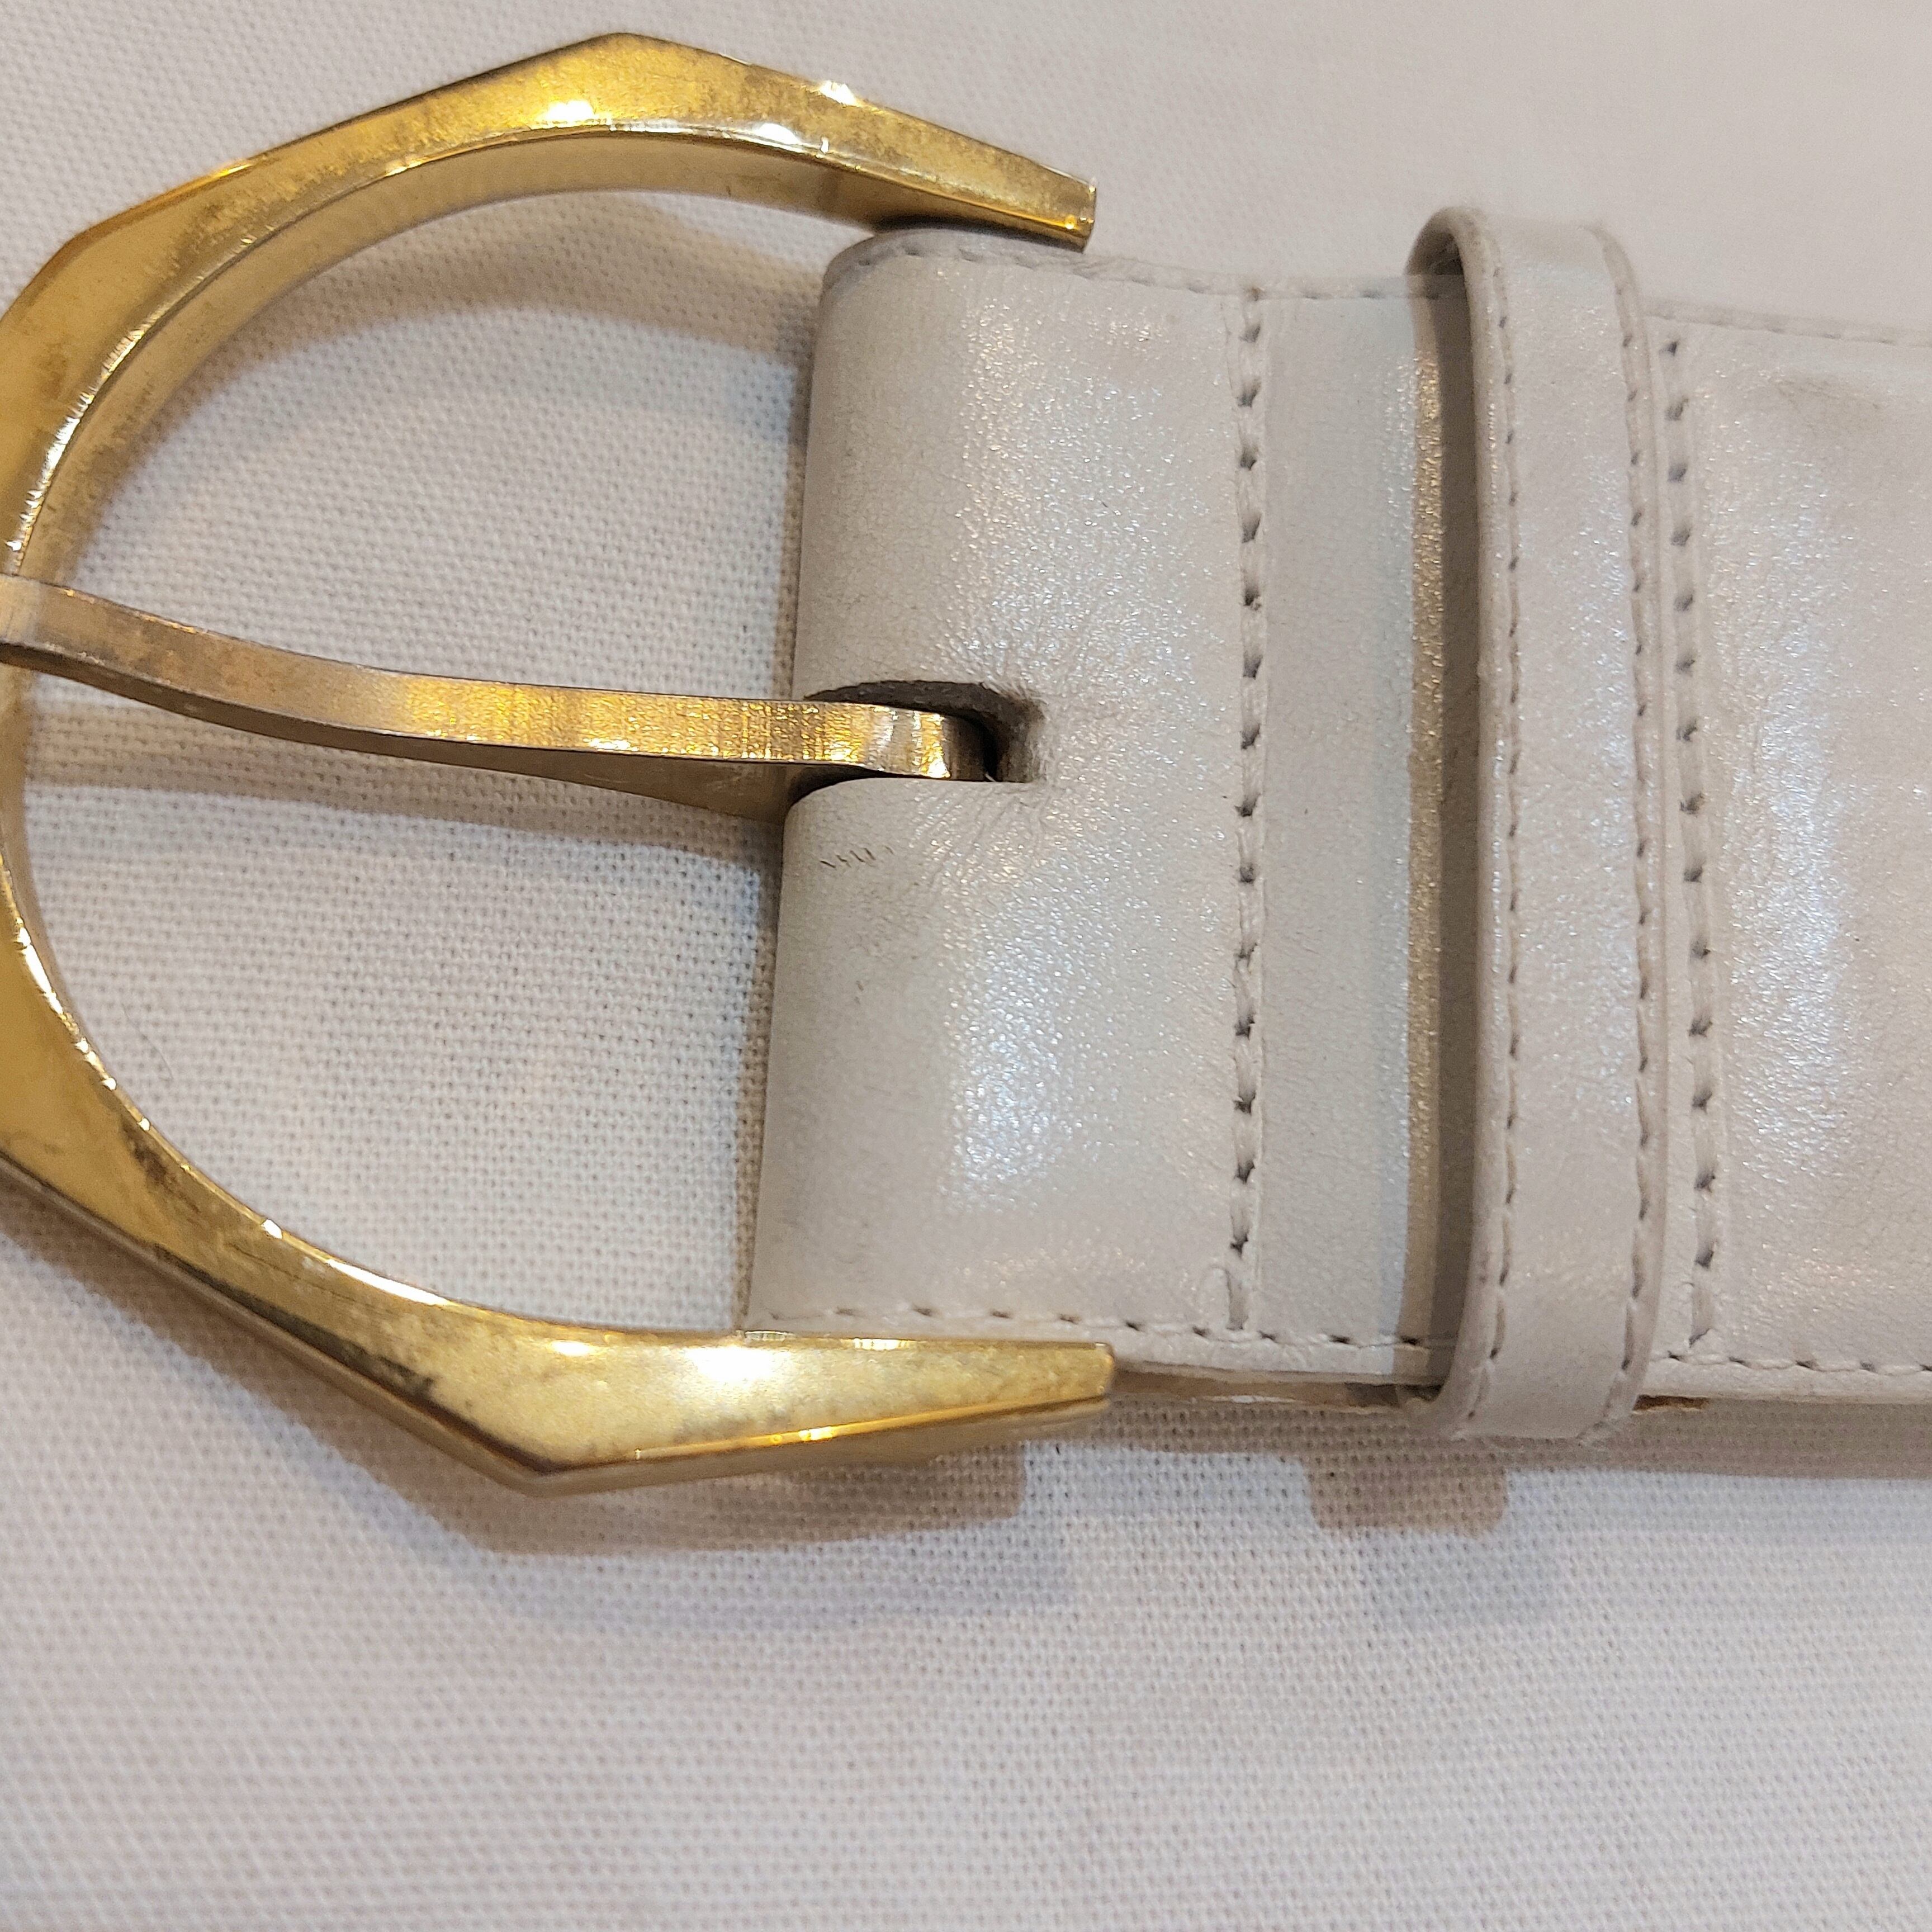 CHARLES JOURDAN Two-tone leather belt / Made in France[c-350]